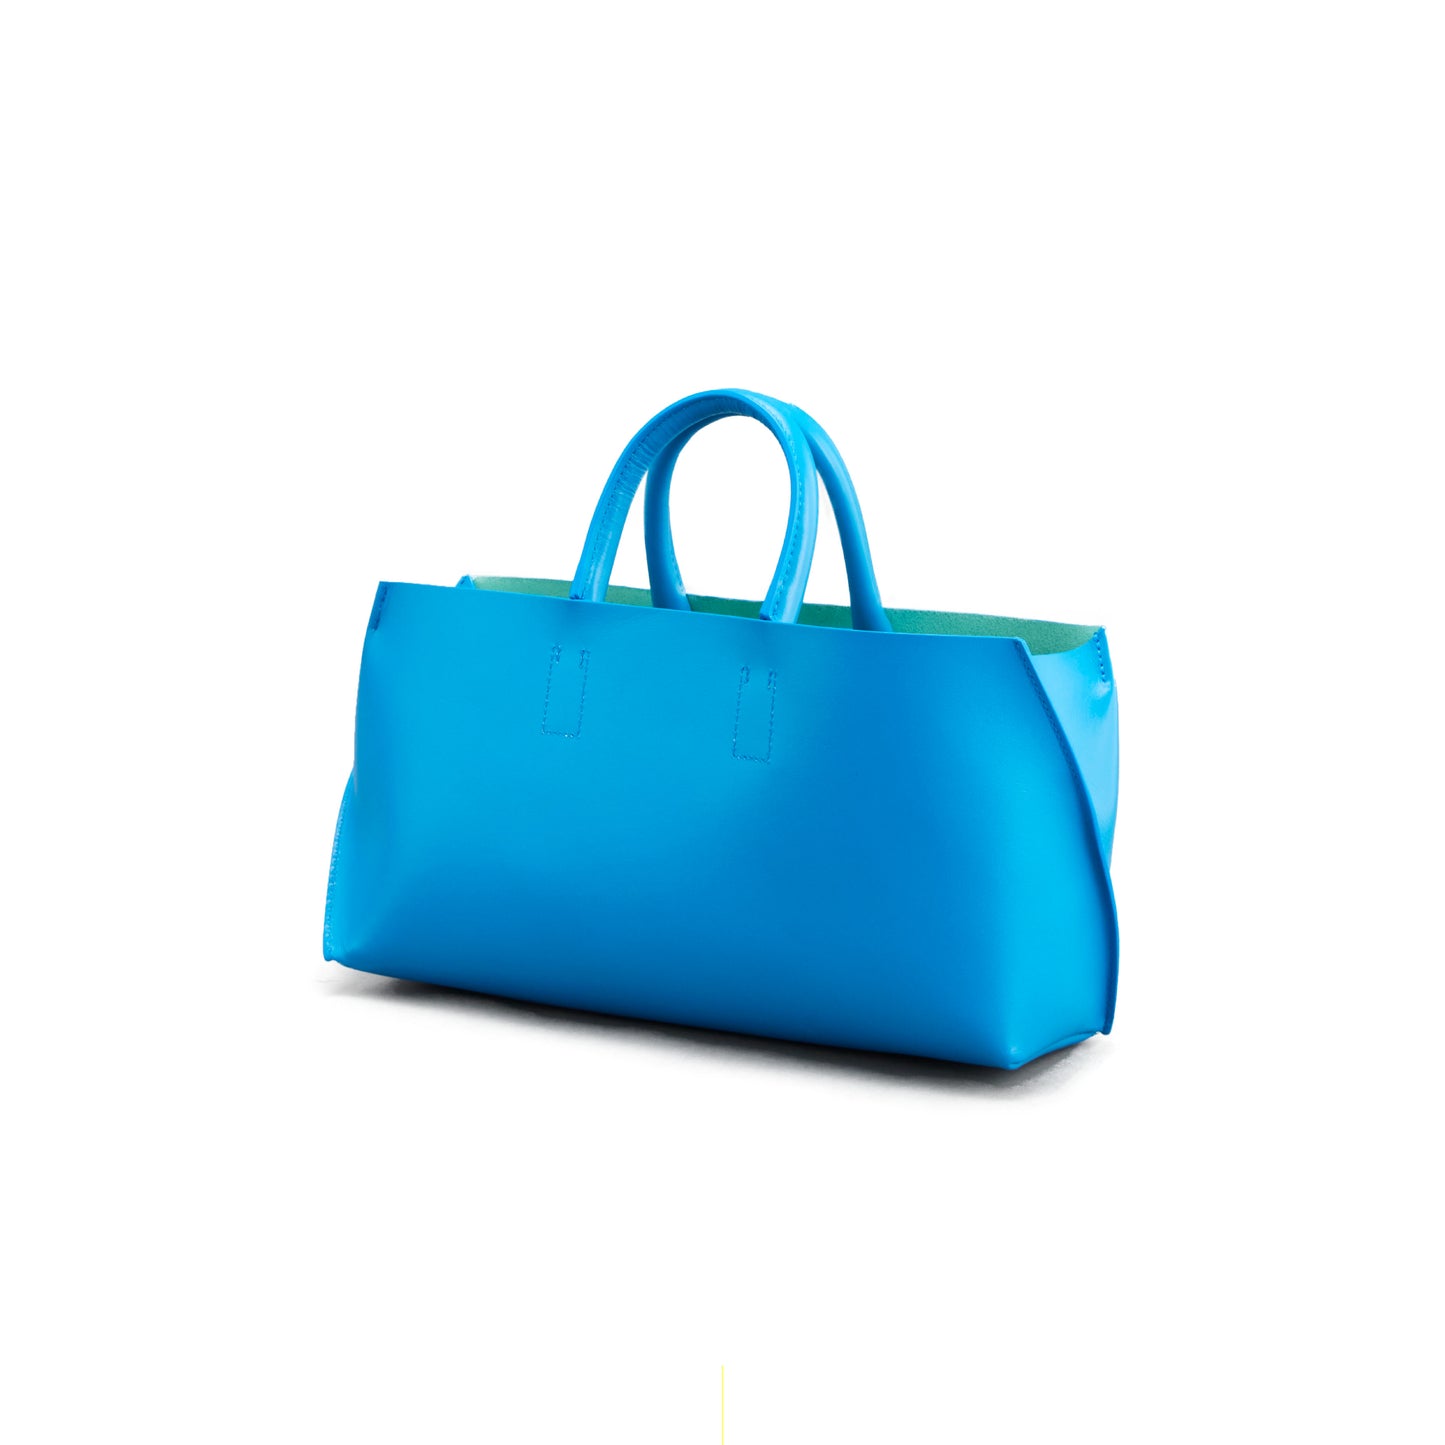 SLOPE WINE TOTE S SMOOTH.L - BLUE